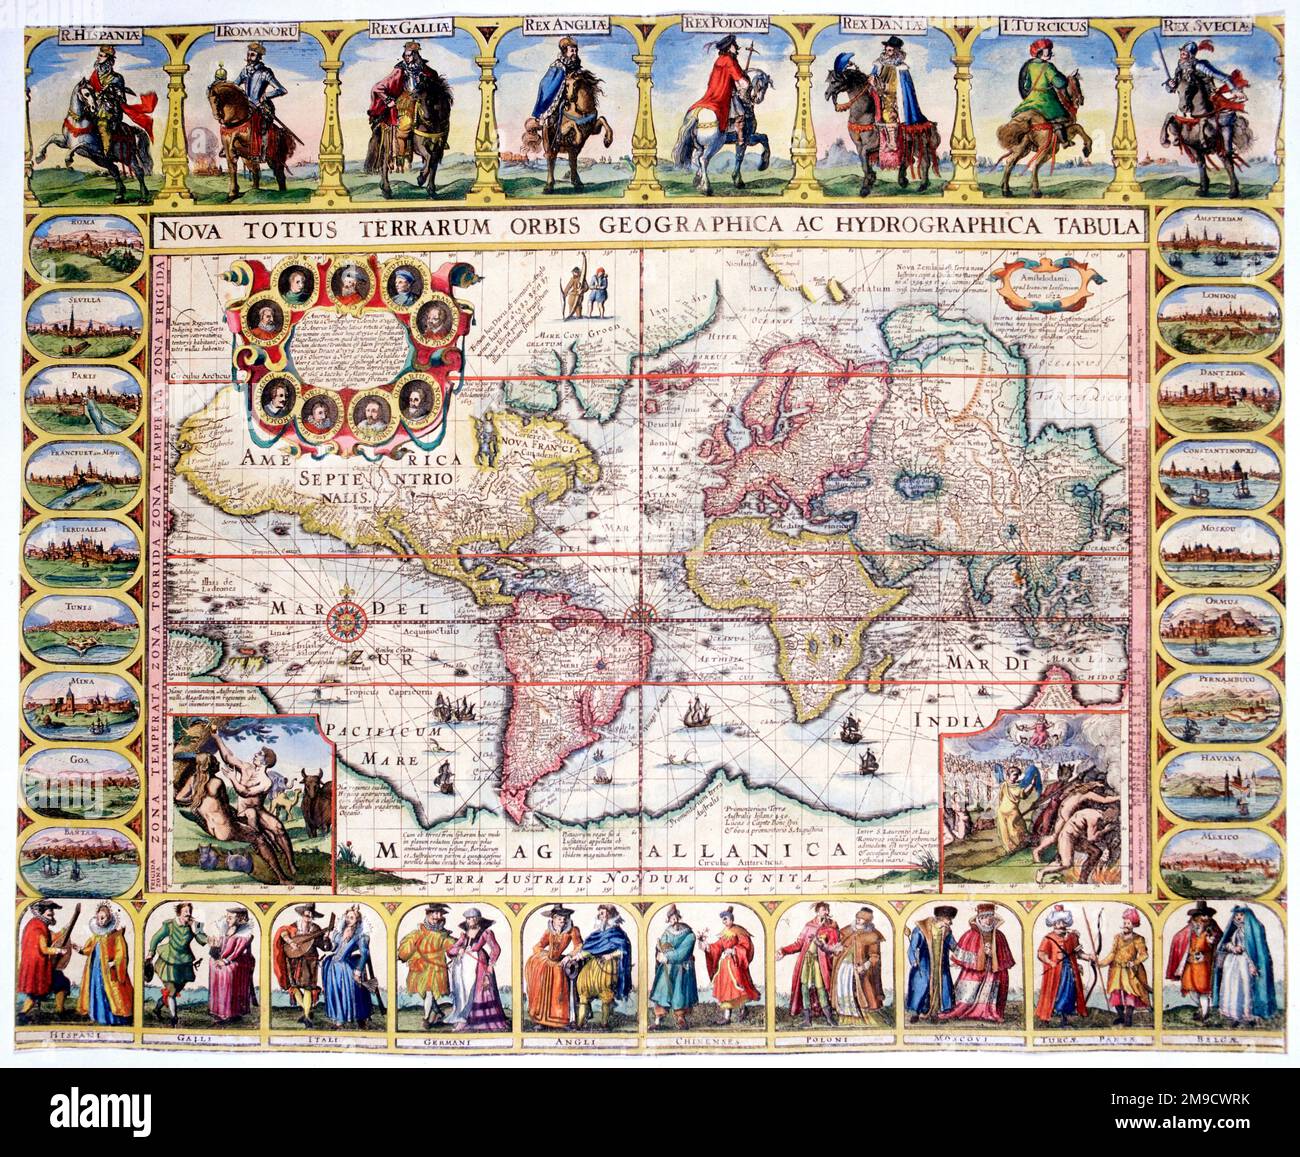 17th century Map of the World (Mercator Projection) with costumed figures and cities - Nova totius terrarum orbis geographica Stock Photo